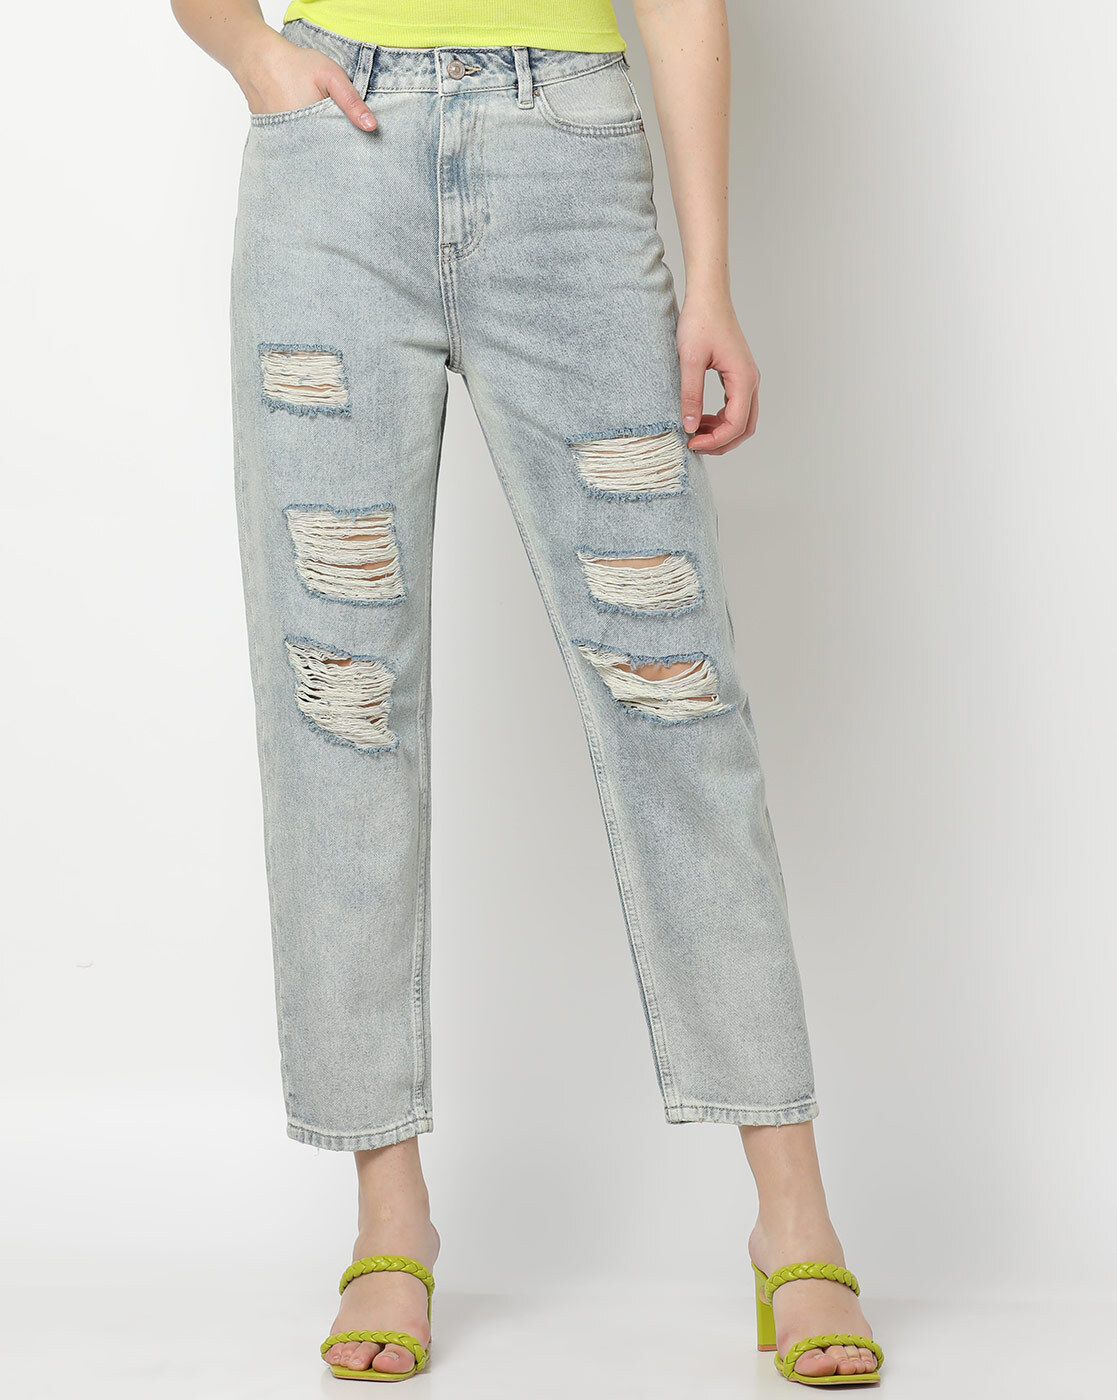 23 Best WideLeg Jeans 2023 From HighRise to LowSlung  Vogue